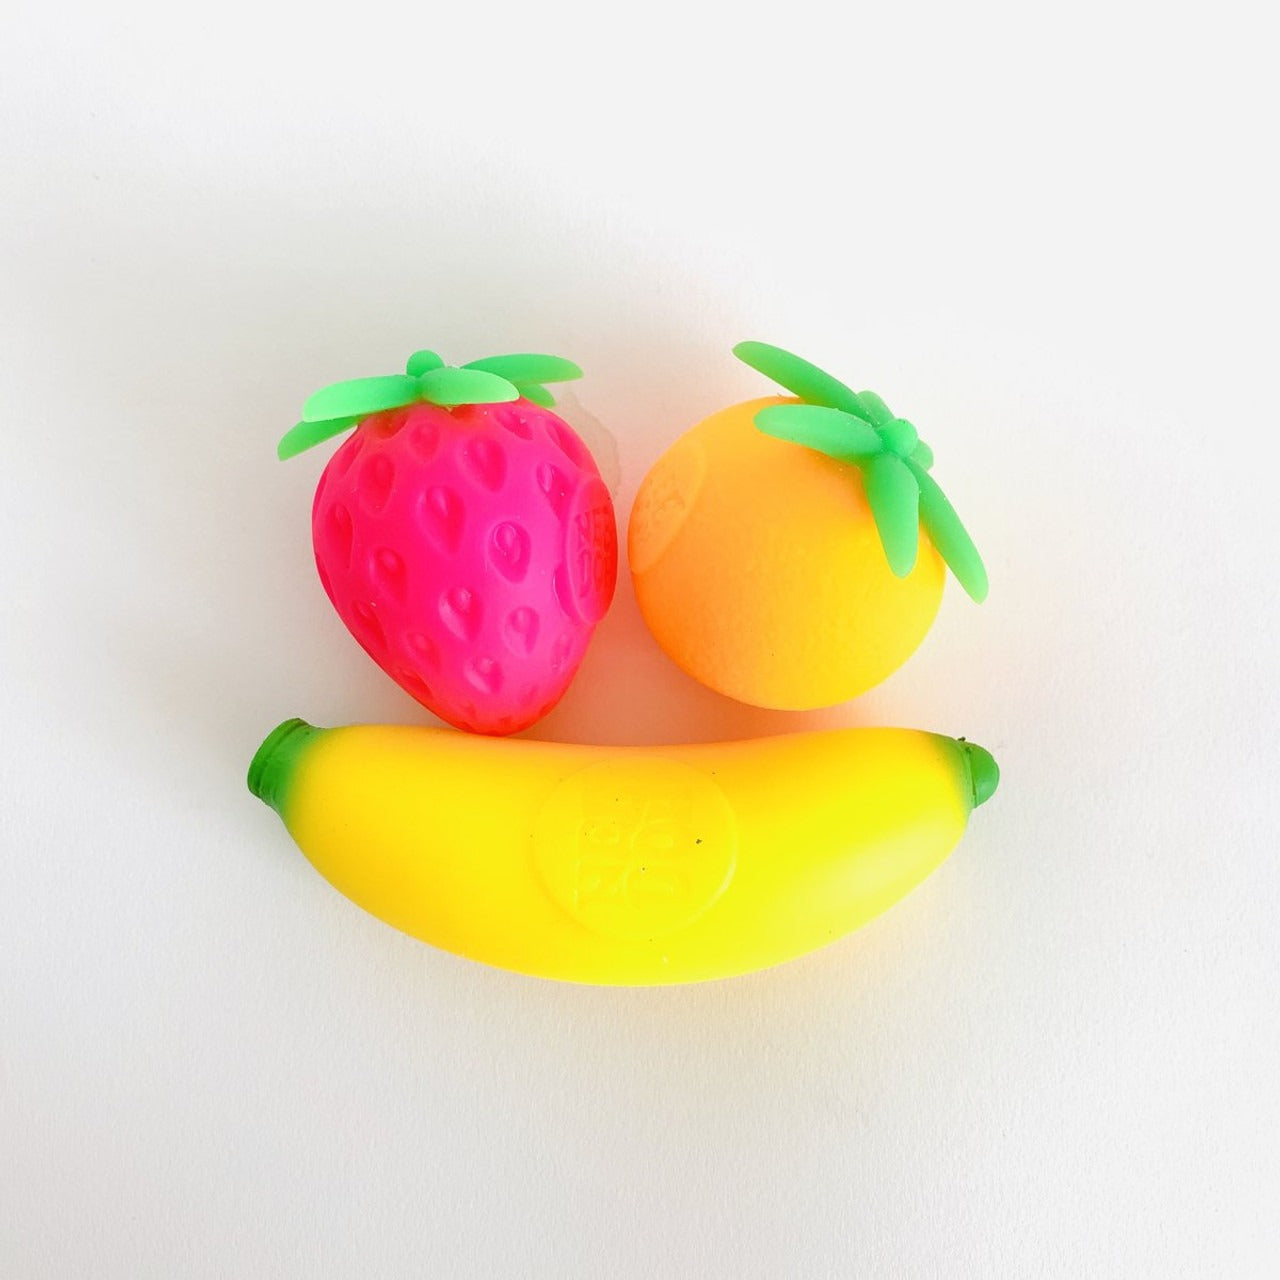 Nee Doh Groovy Fruits, Schylling’s Groovy Fruit Nee Doh is packed with fruity fun. This unique Nee Doh Groovy Fruits fidget toy comes with a Boss Banana, Outta Sight Strawberry, and Far Out Orange that can be squeezed, squished, pulled and popped. Nee Doh Groovy Fruits are made from a non-toxic, dough-like material that always bounces back to its original shape. It can be squished, squashed, pulled and smushed. Ideal for on the go fidget toy fun or as an anxiety reliever. Nee Doh Groovy Fruit also helps chi